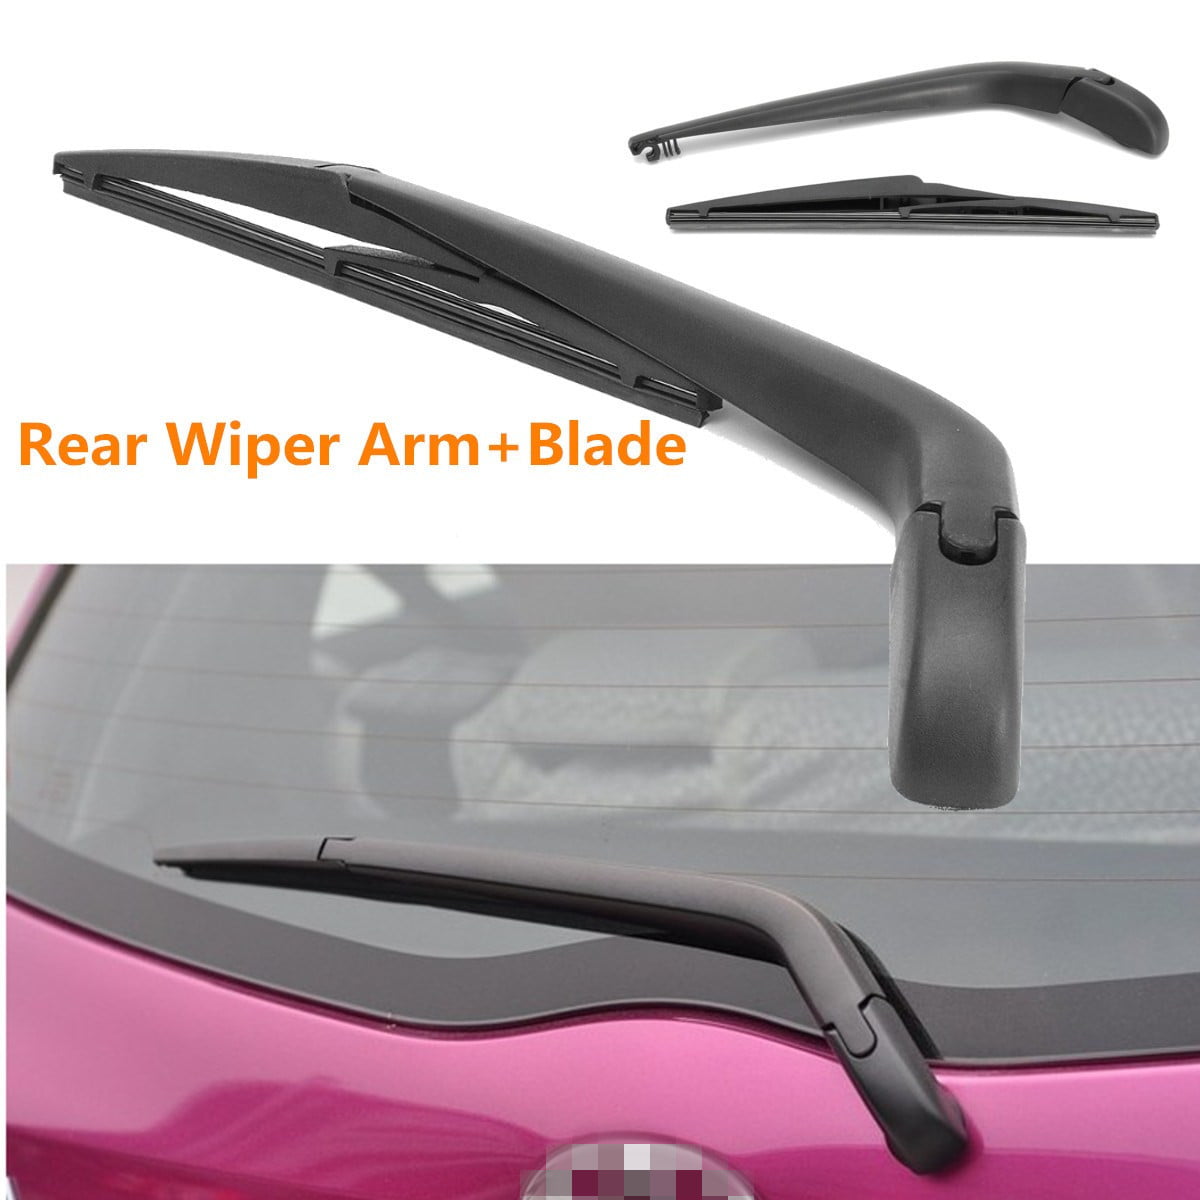 SEMOLTO Rear Windsheild Back Wiper Arm And Blade with Cover Set For Toyota Yaris 2008-2013 New Rear Wiper Arm and Blade